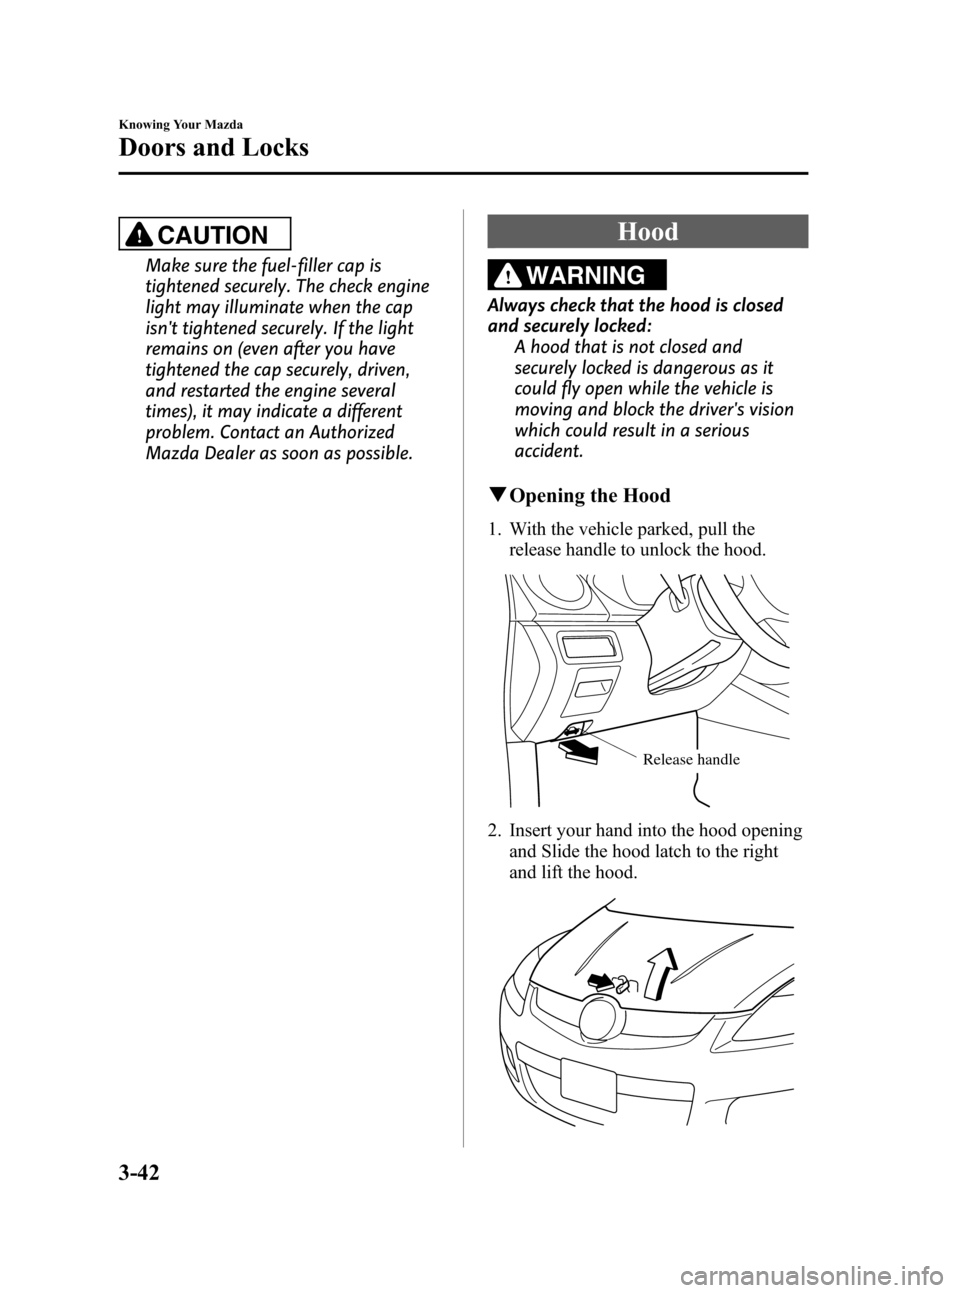 MAZDA MODEL CX-7 2009  Owners Manual (in English) Black plate (120,1)
CAUTION
Make sure the fuel-filler cap is
tightened securely. The check engine
light may illuminate when the cap
isnt tightened securely. If the light
remains on (even after you ha